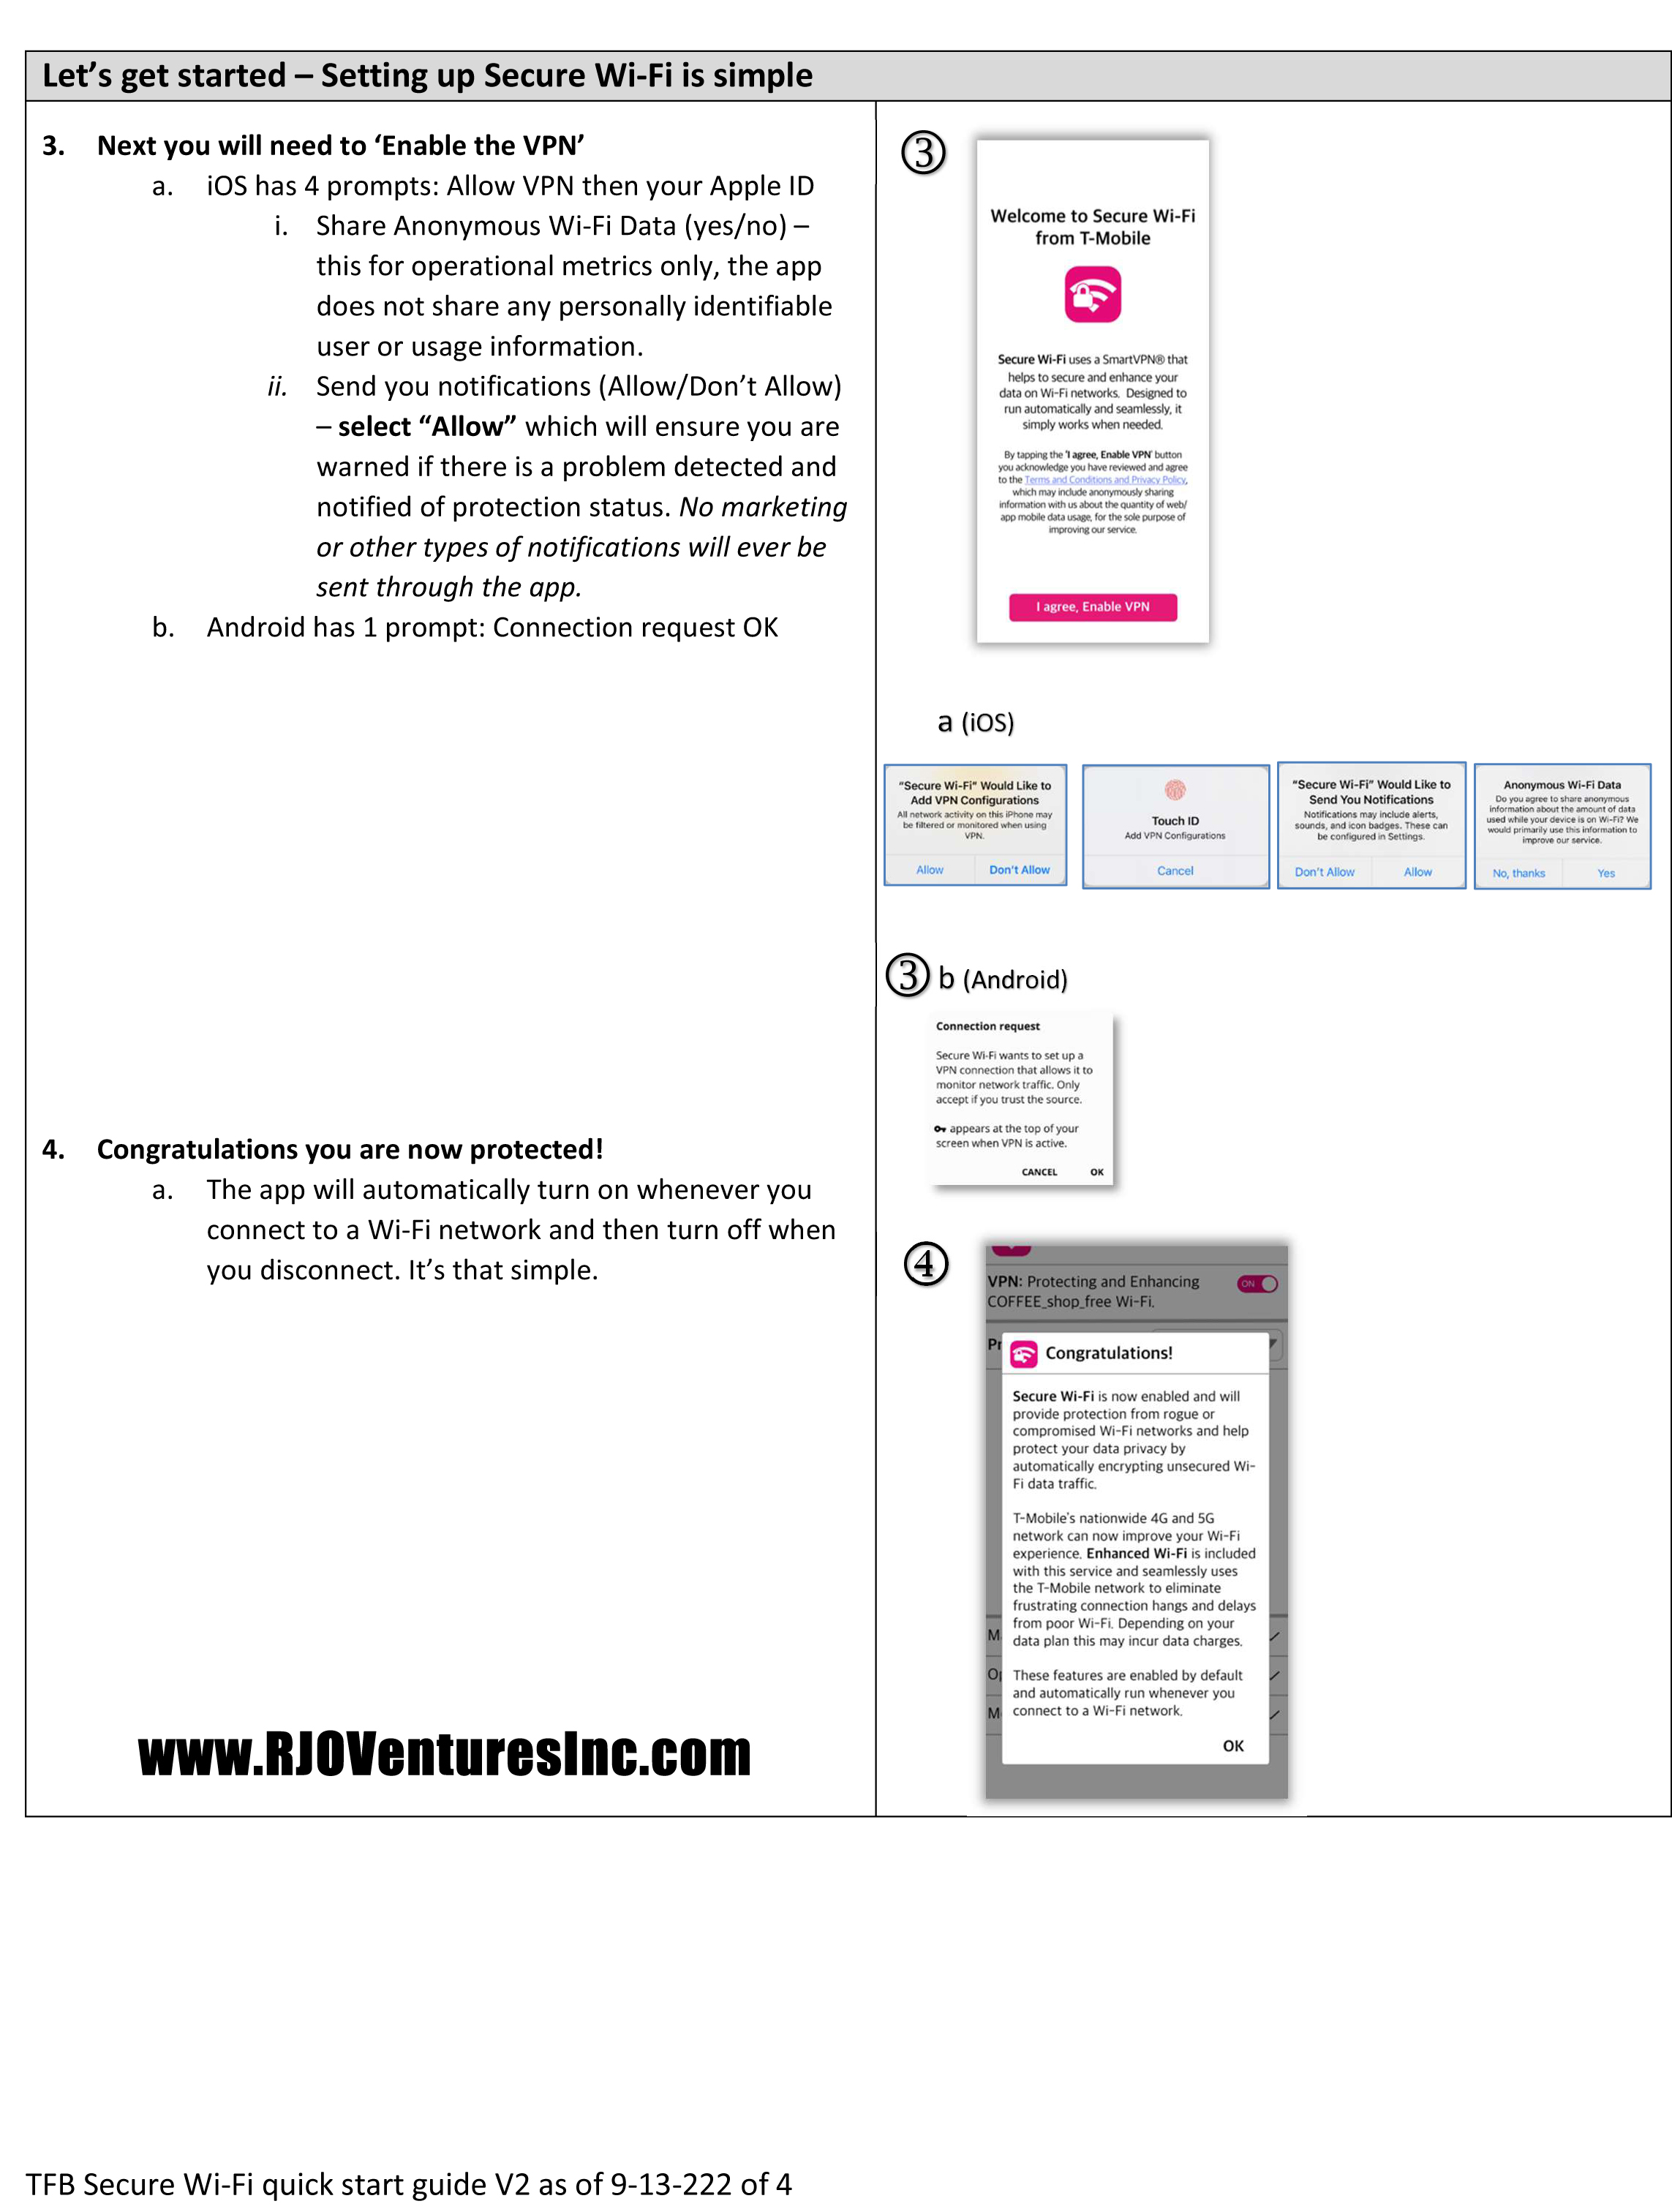 Welcome to Secure Wi-Fi by T-Mobile; Quick Start Guide [RJOVenturesInc.com]